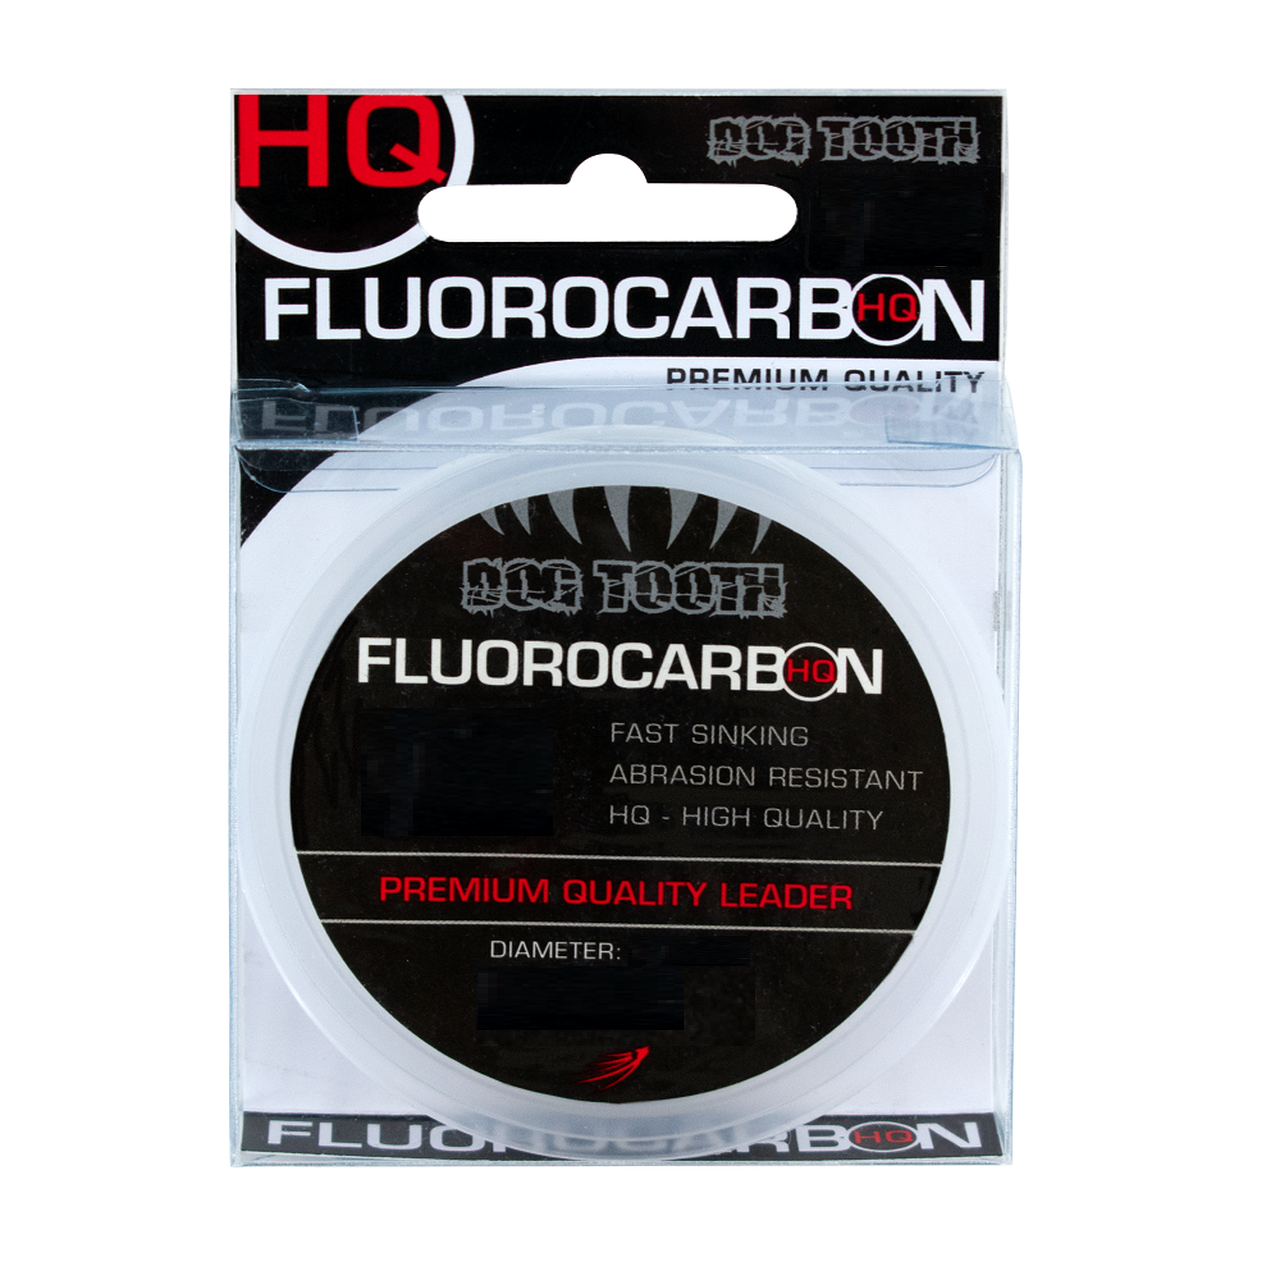 Dog Tooth DT028 High Quality Micro Fluorocarbon Leader